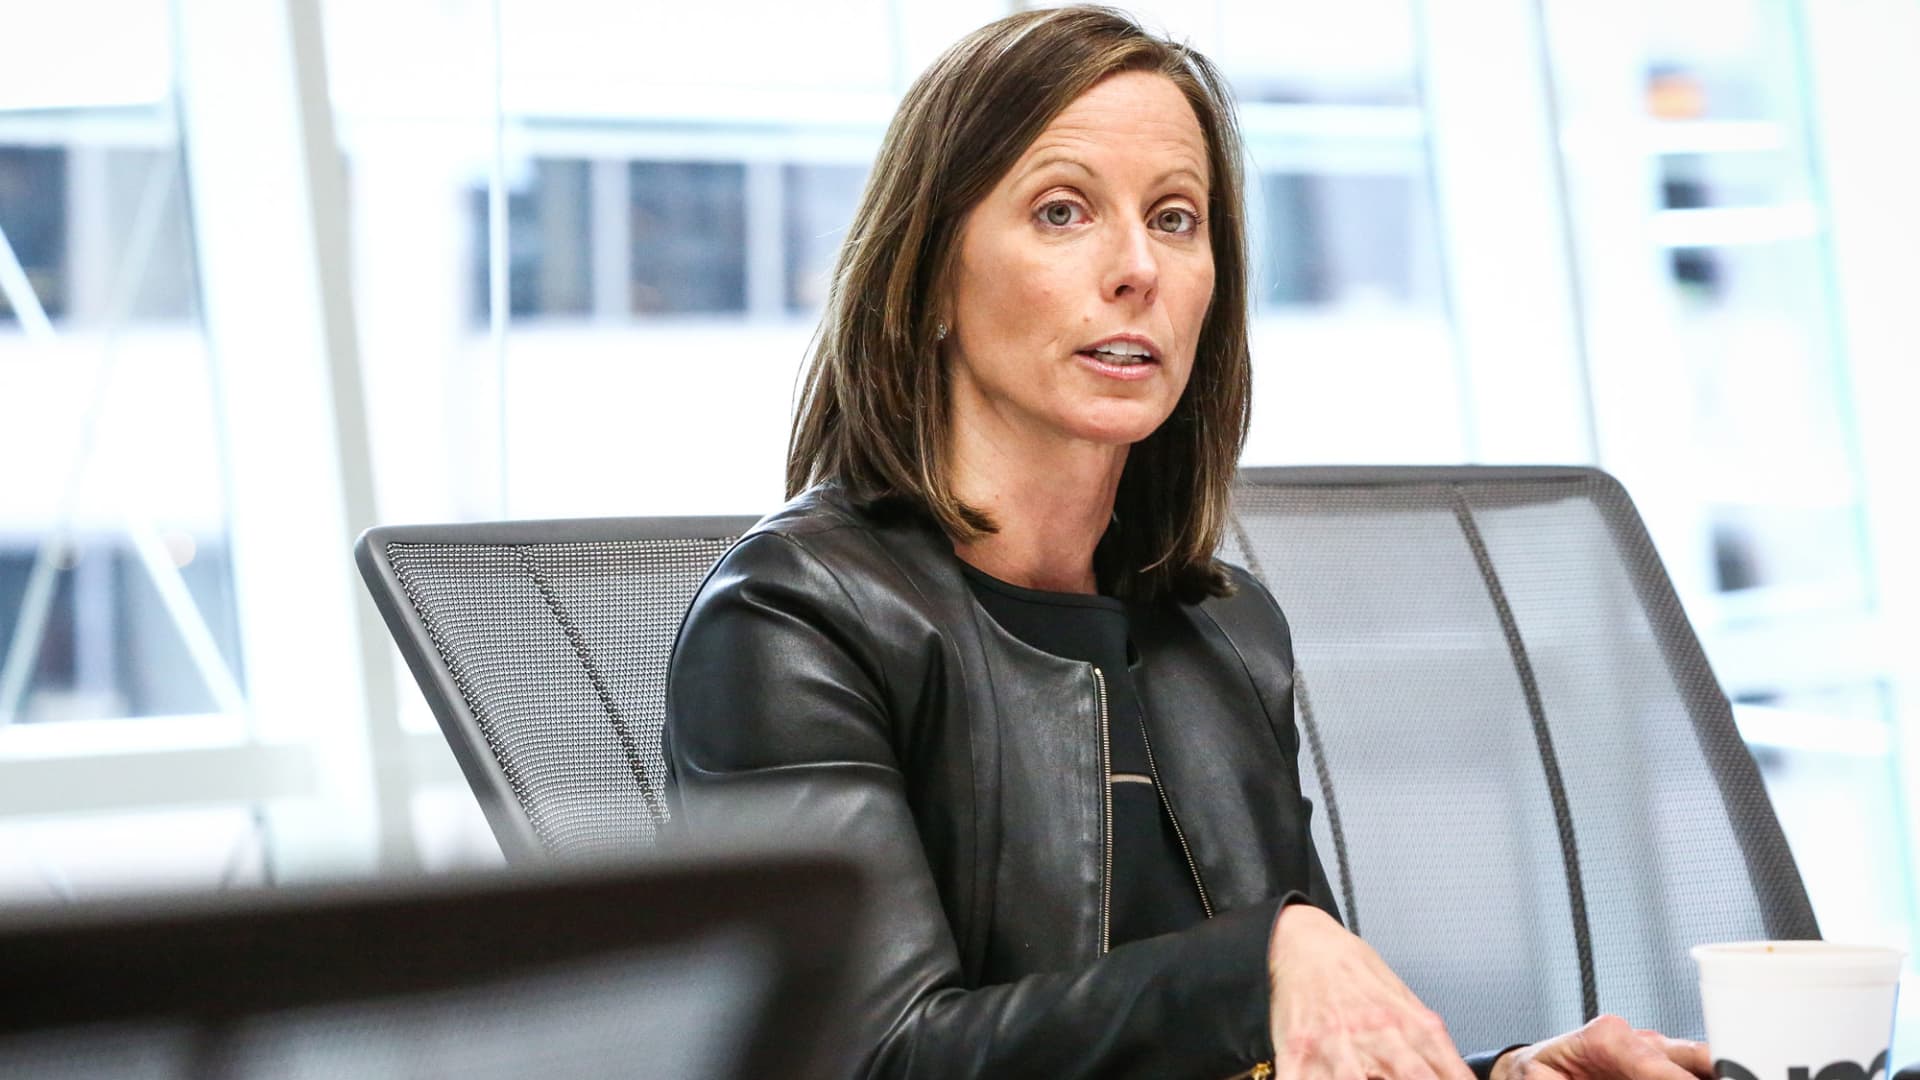 Adena Friedman, chief executive officer of Nasdaq, speaks during an interview in New York.